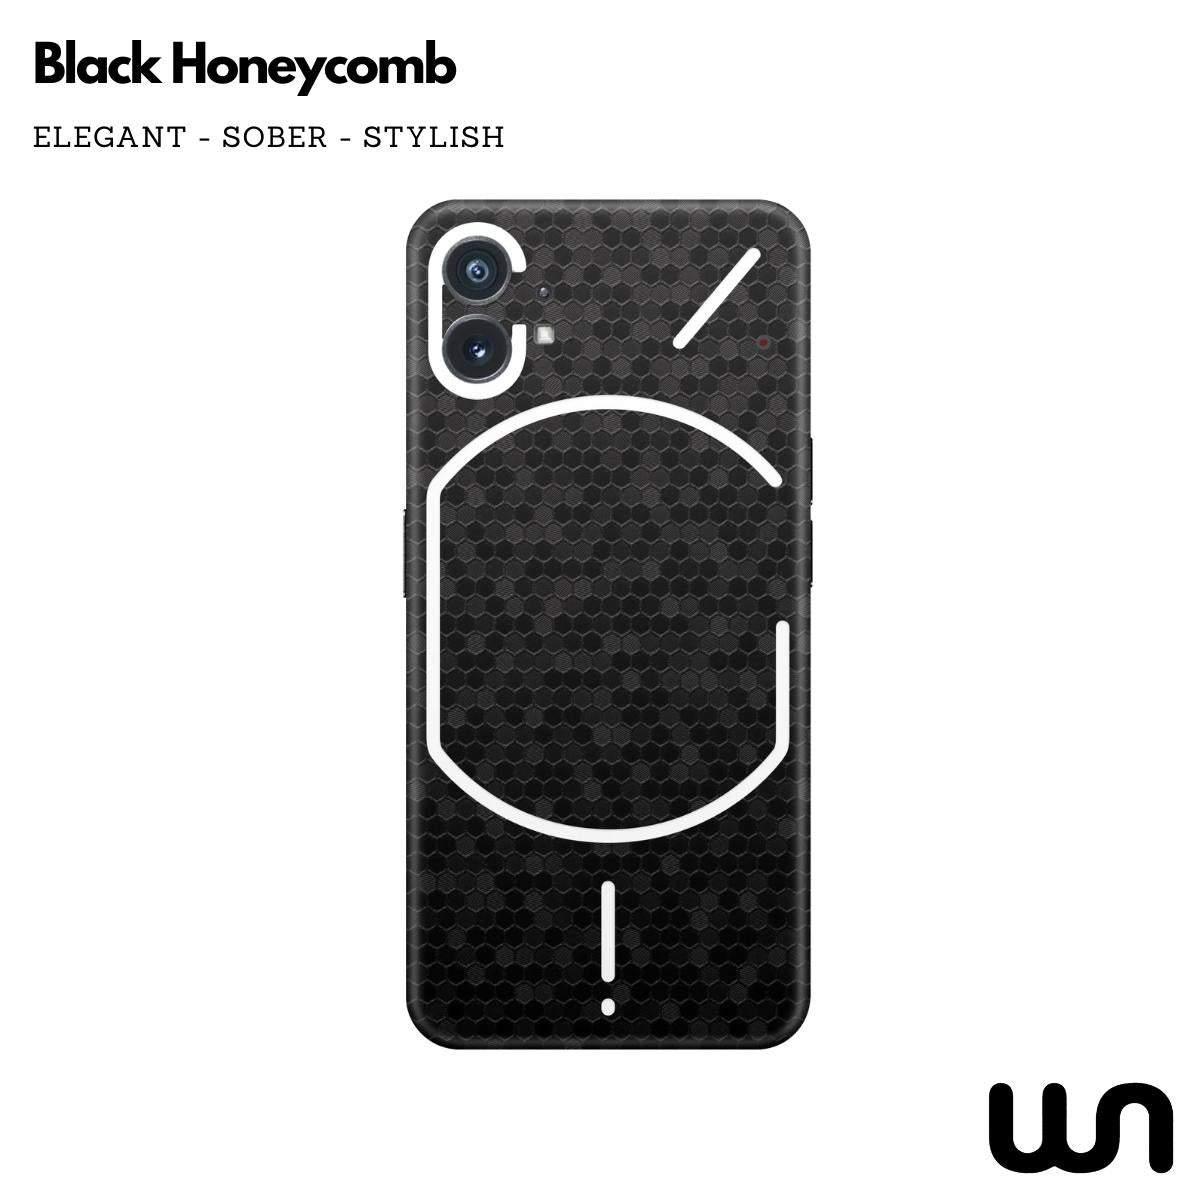 Honeycomb Black Textured Skin for Nothing Phone 1